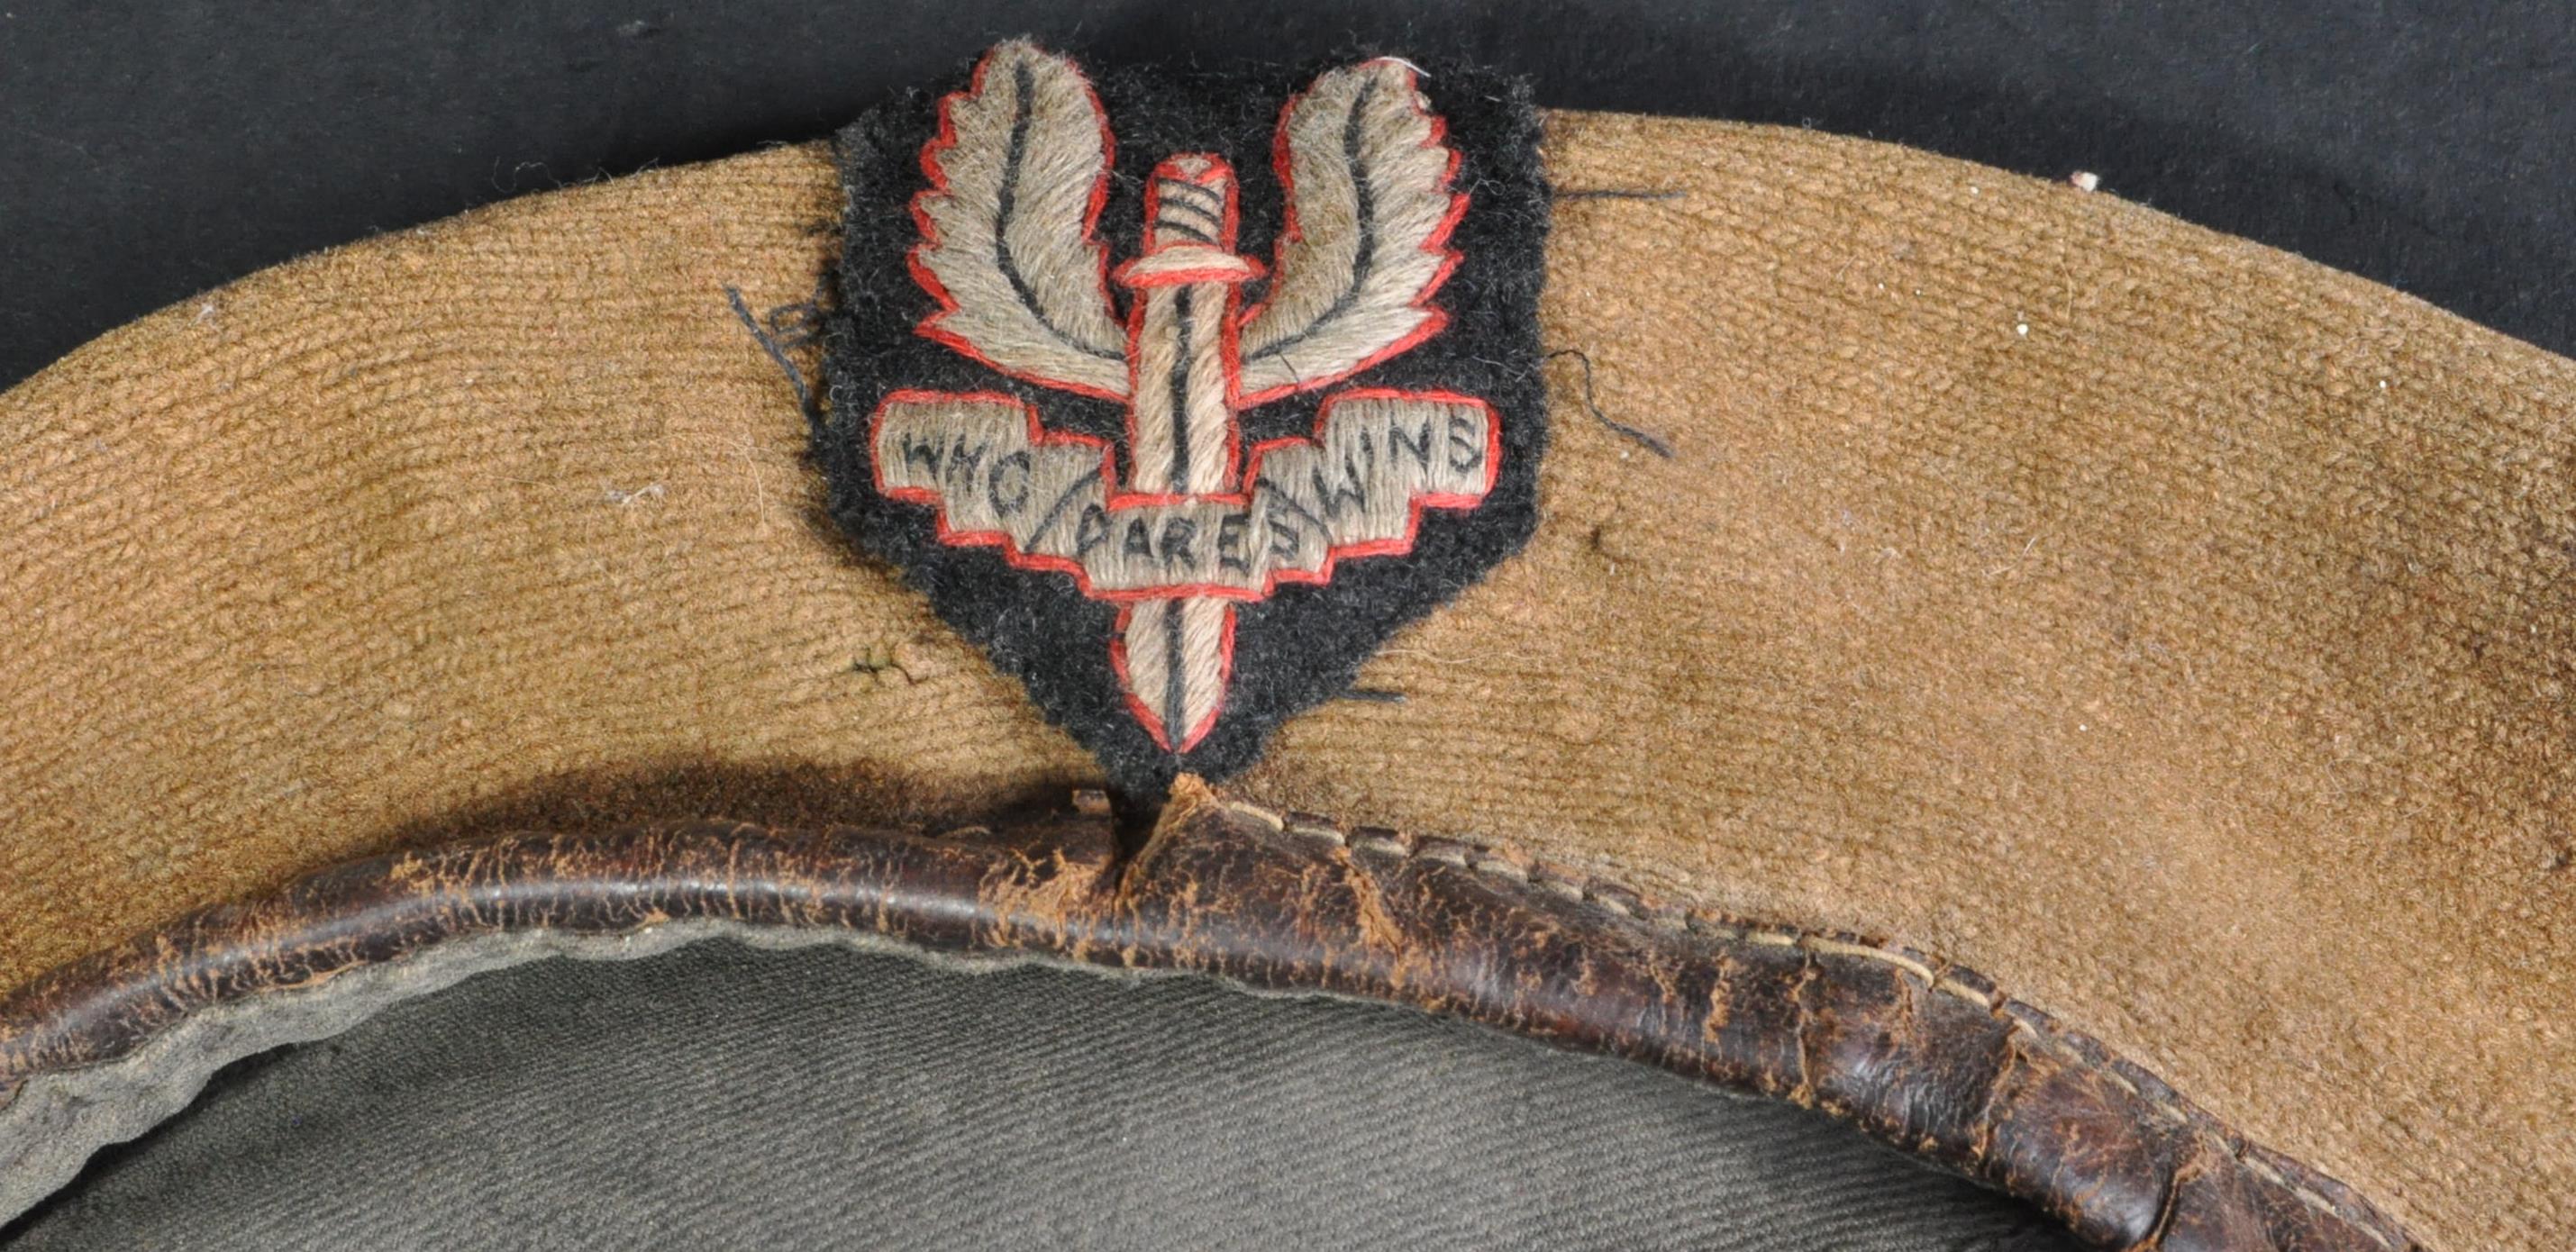 WWII SECOND WORLD WAR - SPECIAL AIR SERVICE SAS BADGED BERET - Image 2 of 4